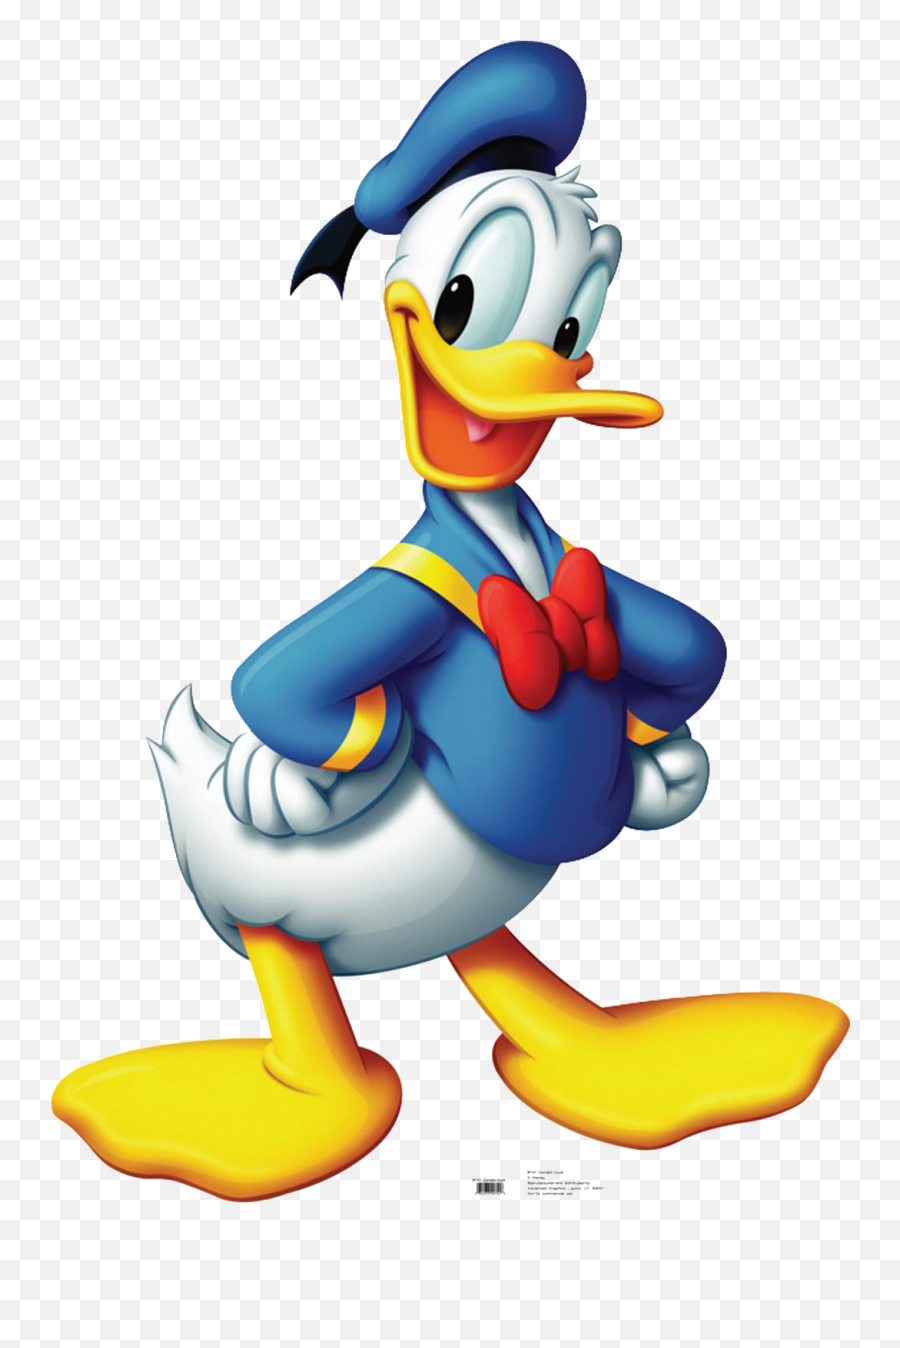 Donald Duck Png Image - Donald Duck Images Hd,Duck Png